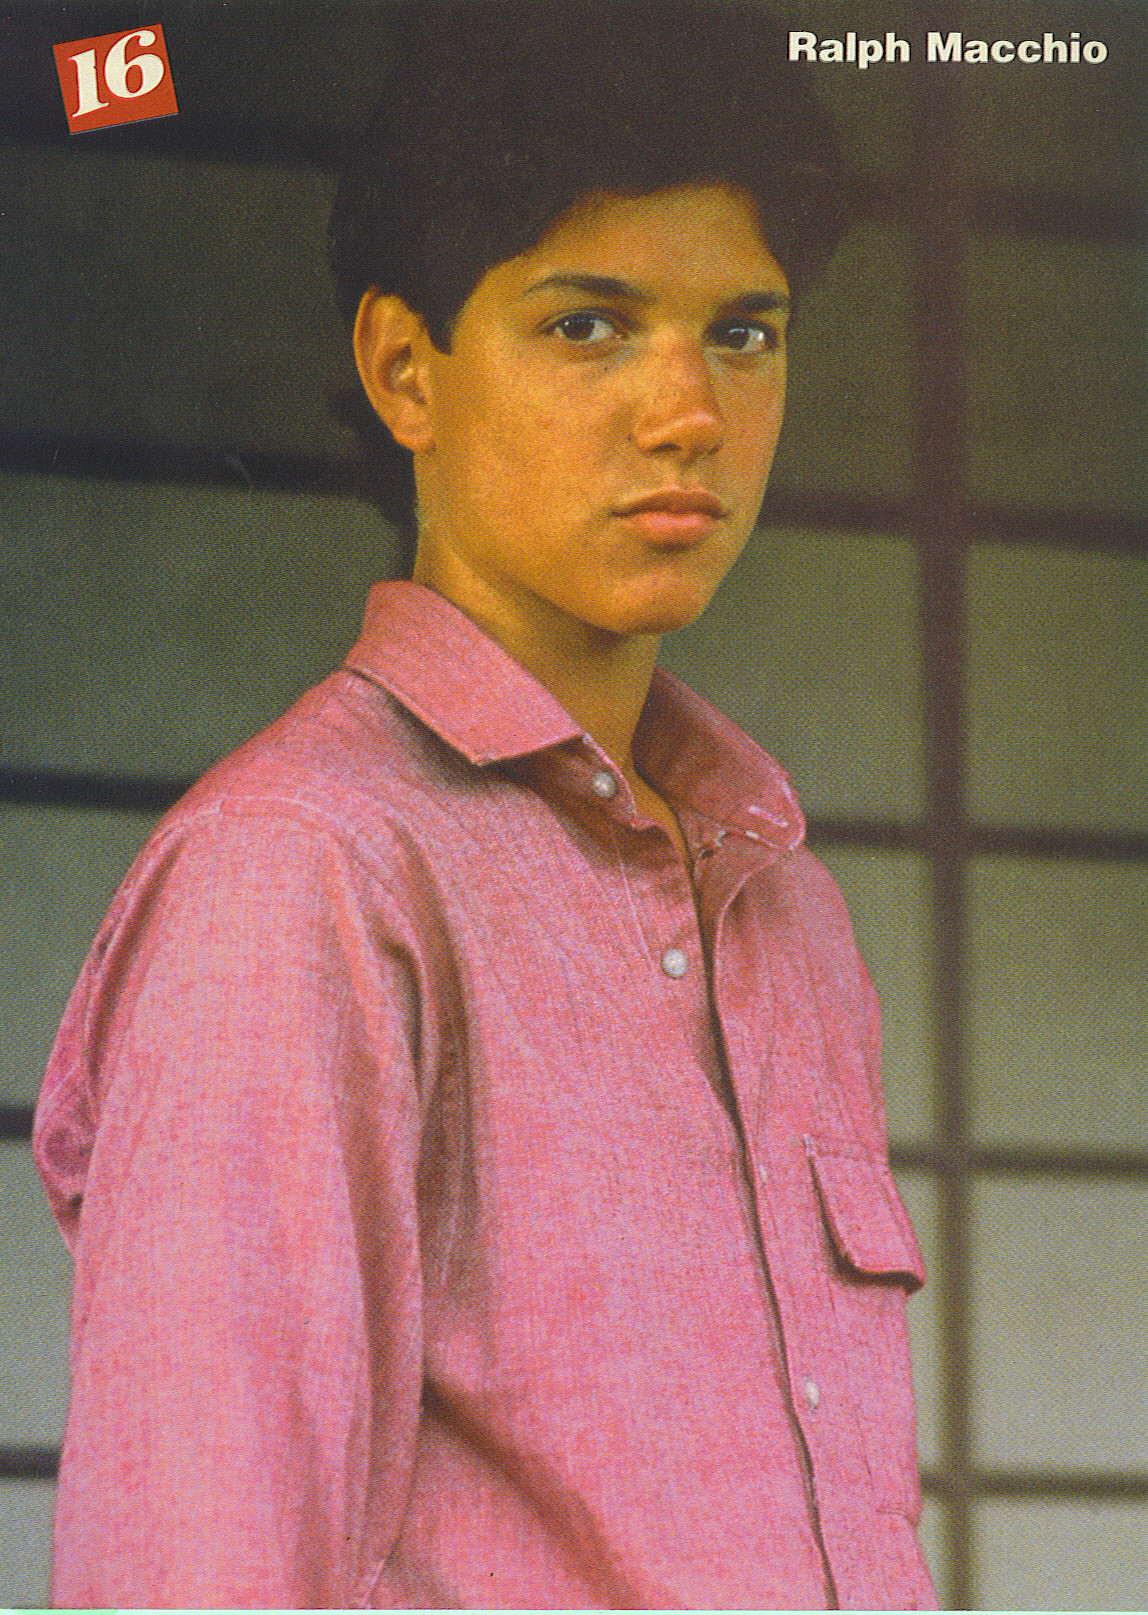 Free download Ralph Macchio image ralph macchio HD wallpaper and background [1148x1615] for your Desktop, Mobile & Tablet. Explore Ralph Macchio Wallpaper. Ralph Macchio Wallpaper, Ralph Lauren Wallpaper, Ralph